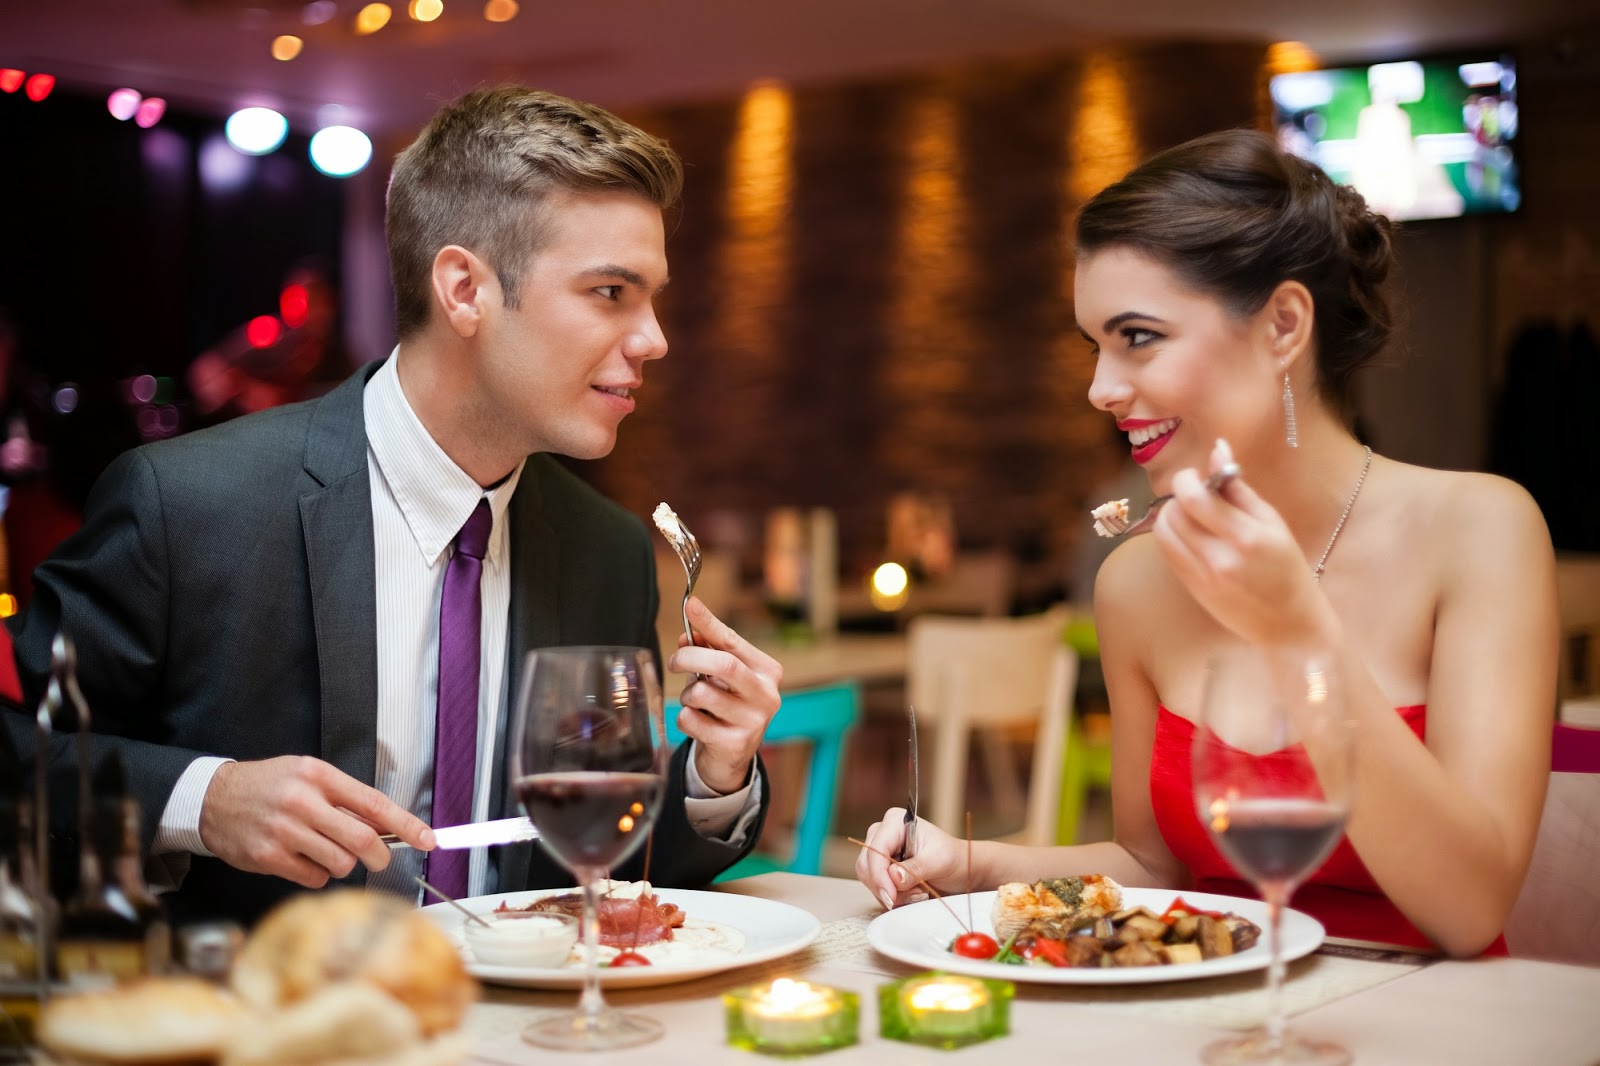 Restaurants Ottawa: What to look for in a Restaurant for Date Night